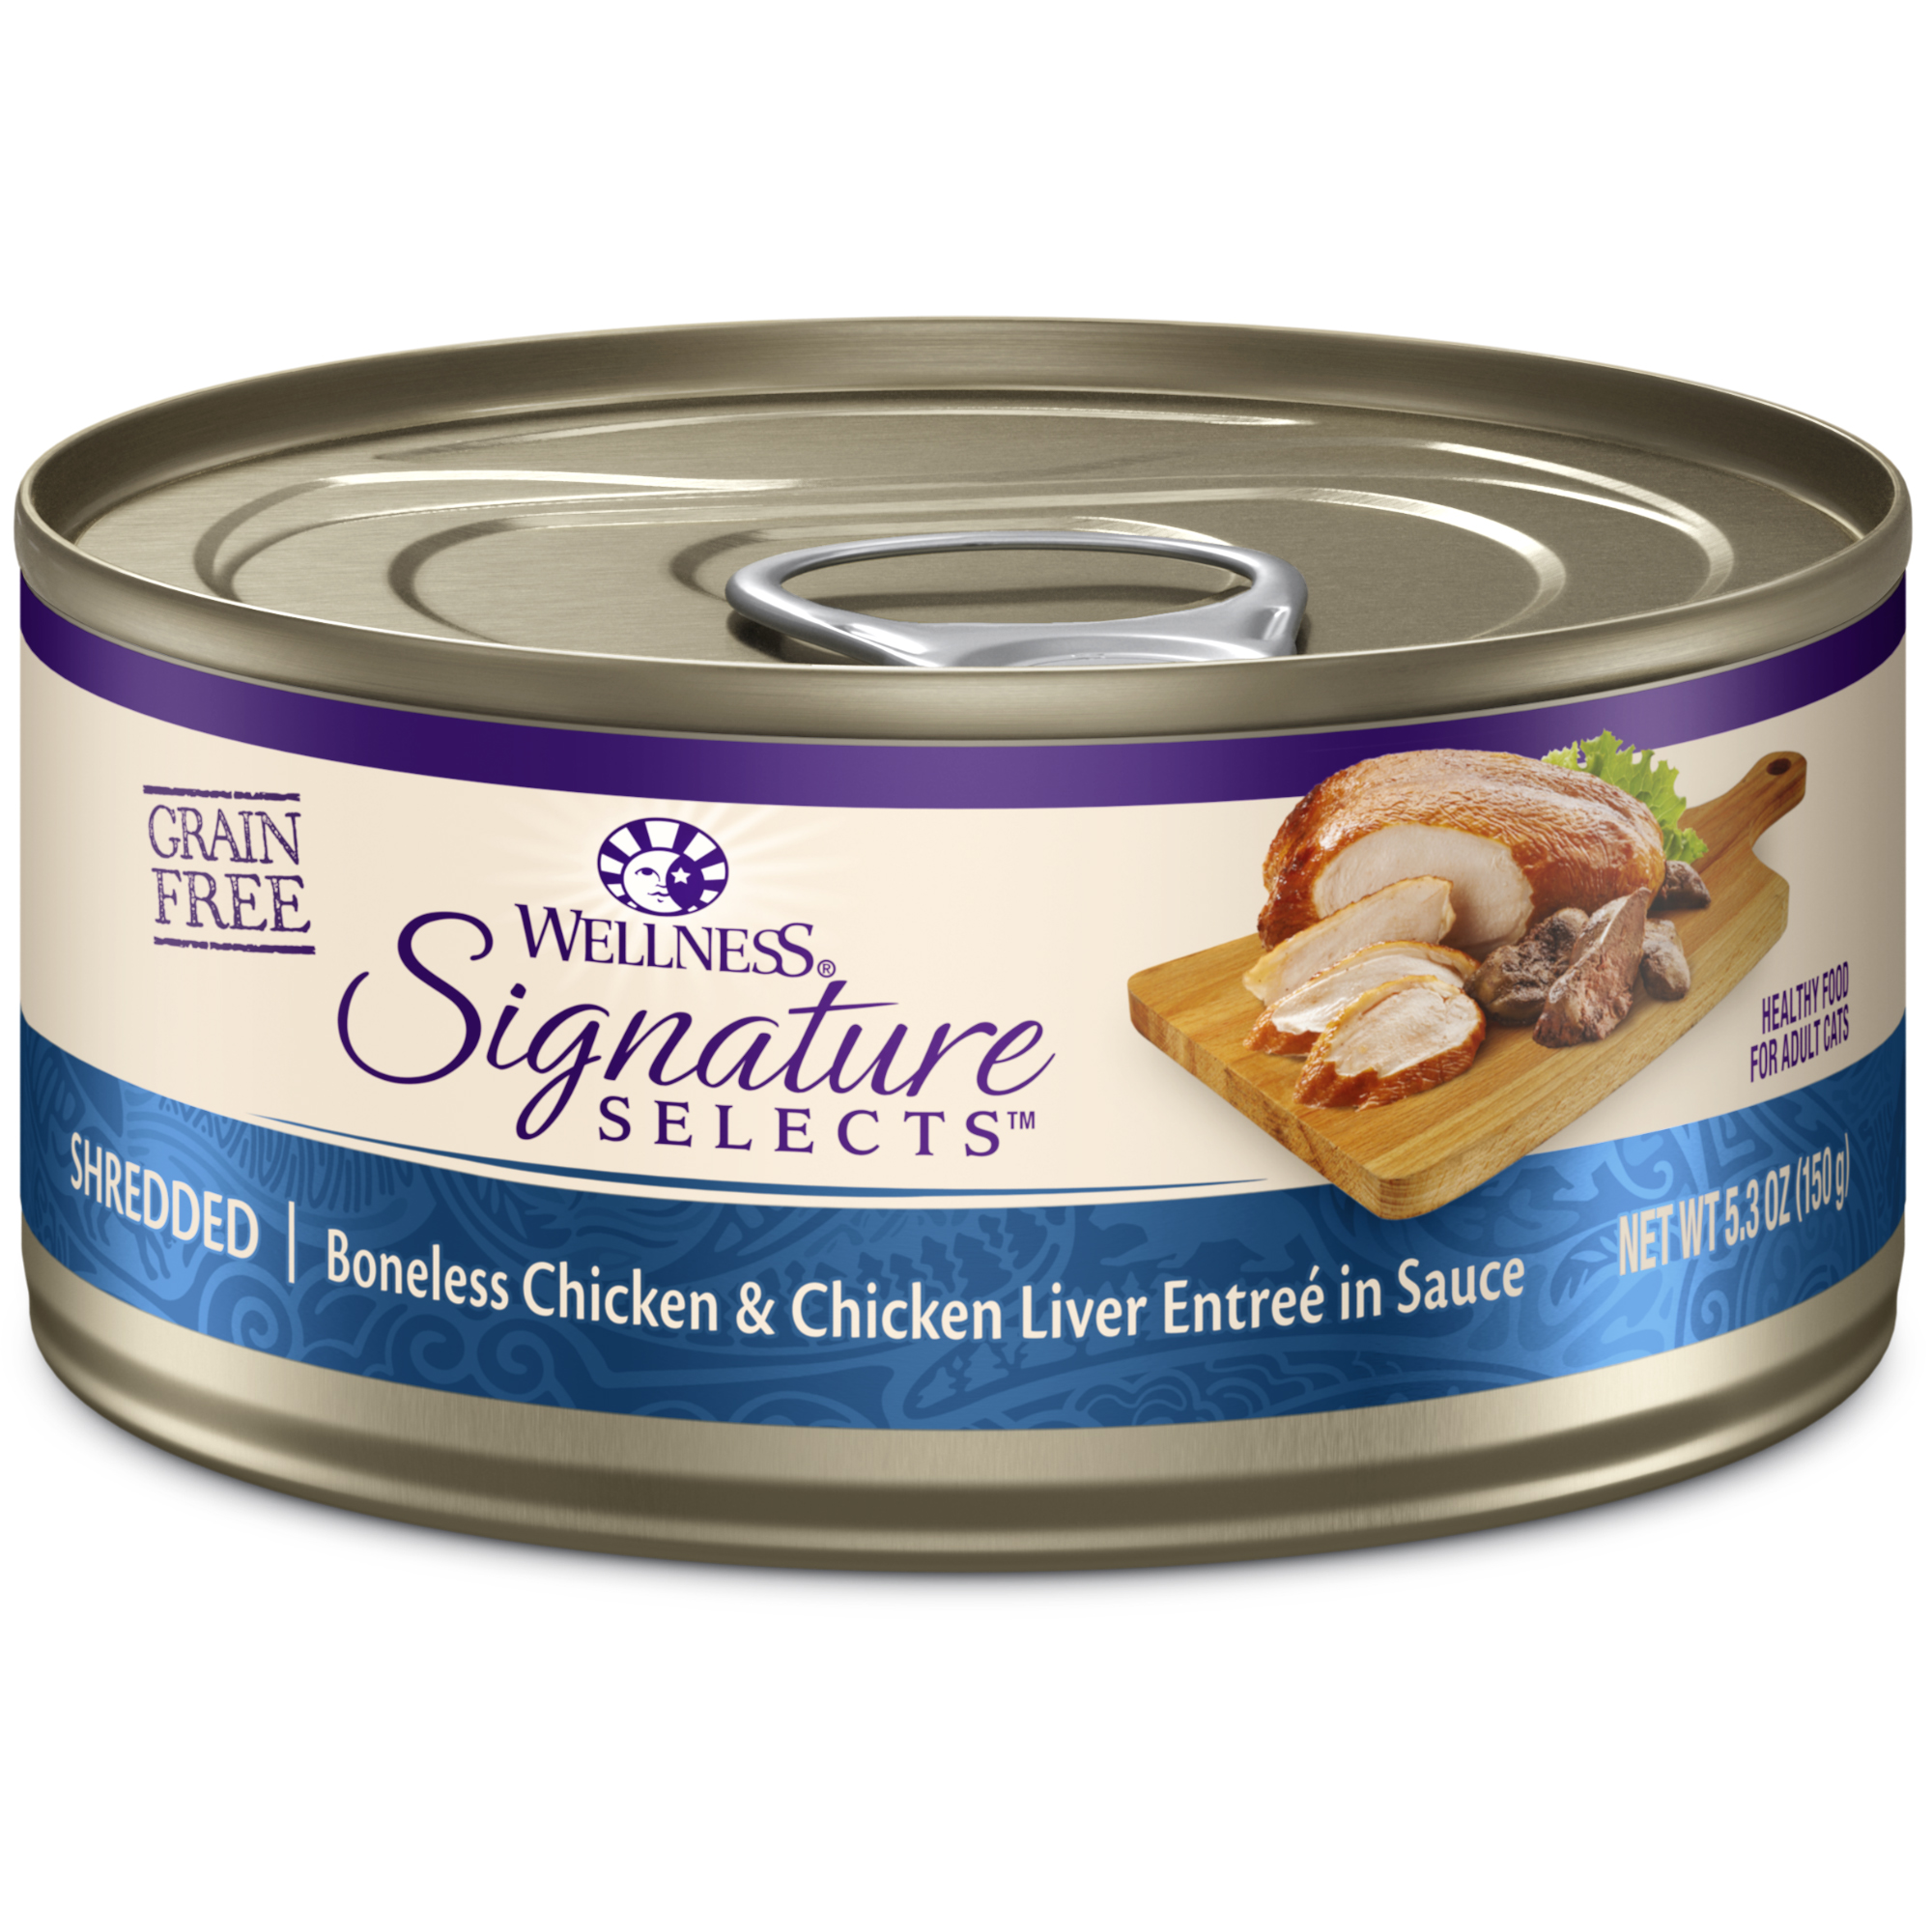 Wellness CORE Signature Selects Grain Free Canned Cat Food, Shredded Chicken & Chicken Liver in Sauce, 5.3 Ounces (Pack of 12) - image 1 of 8